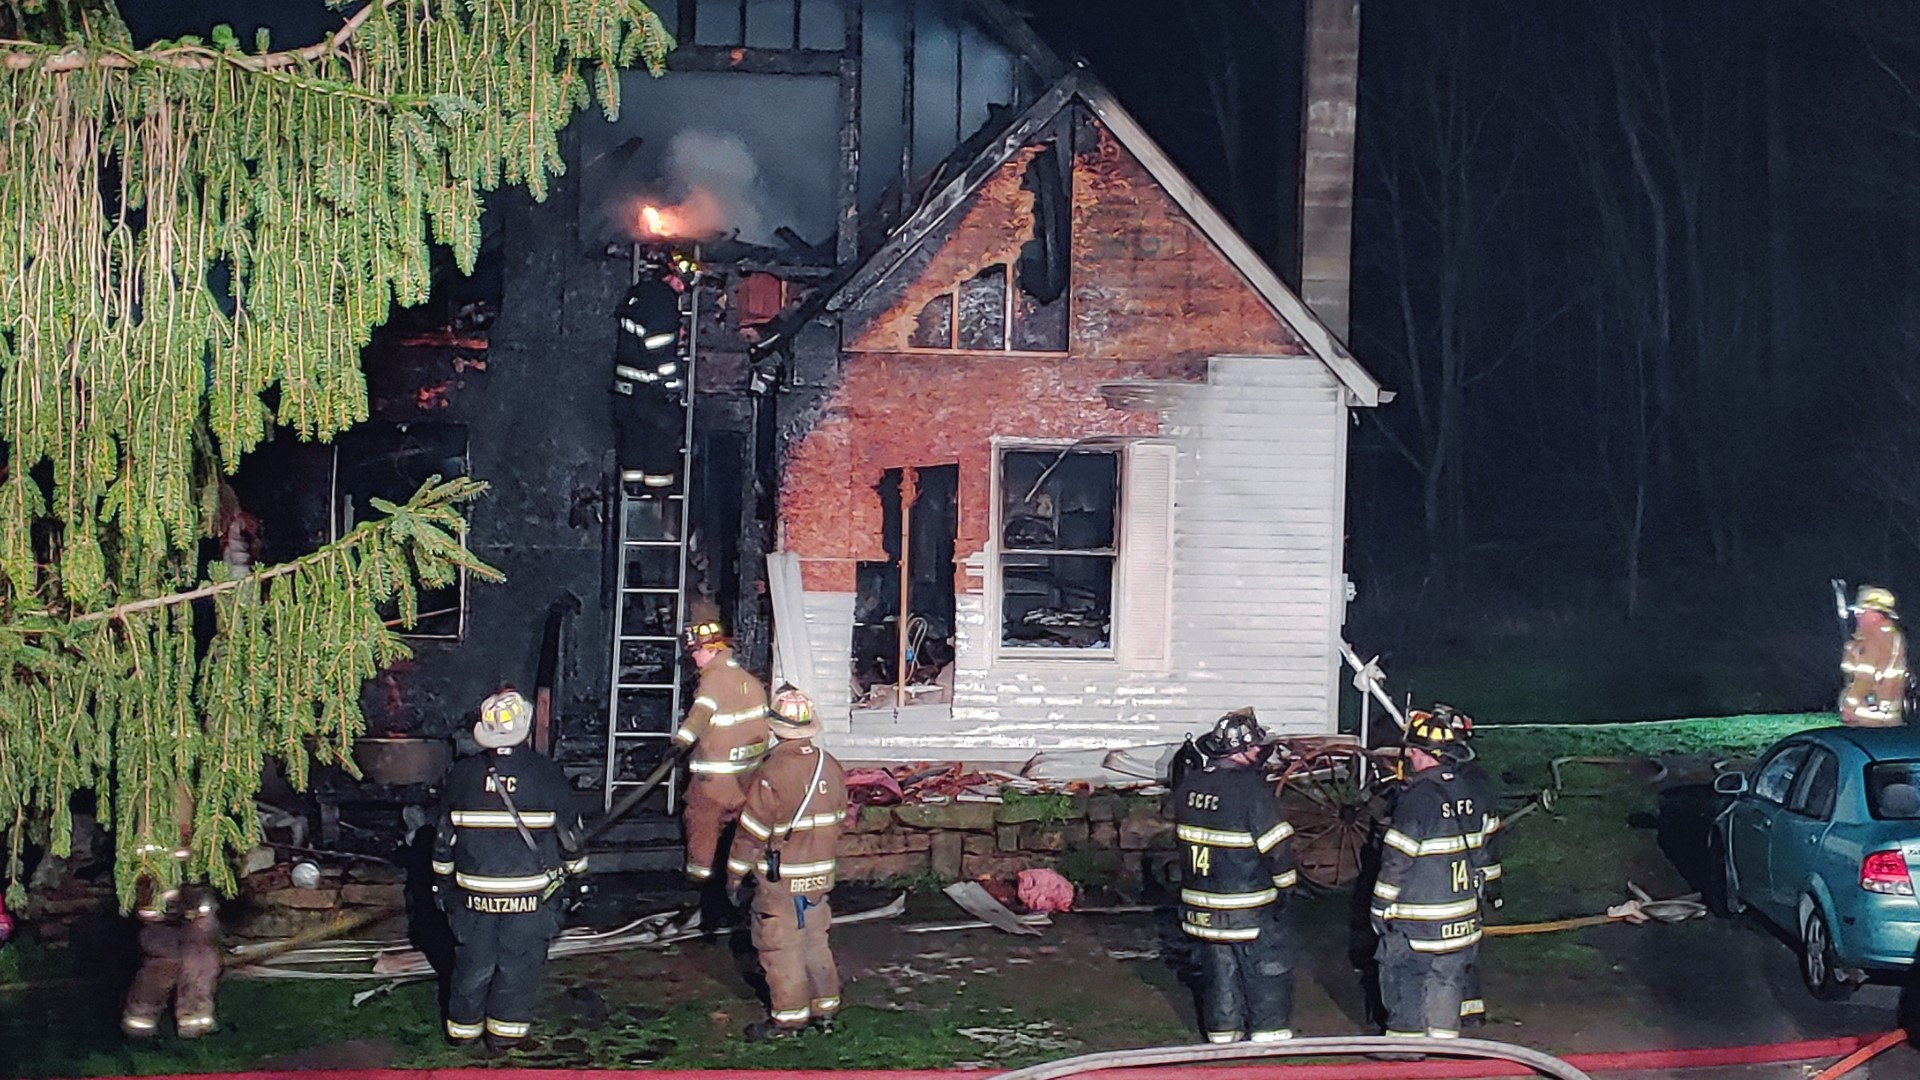 A fire destroyed a house early Friday morning in Schuylkill County.